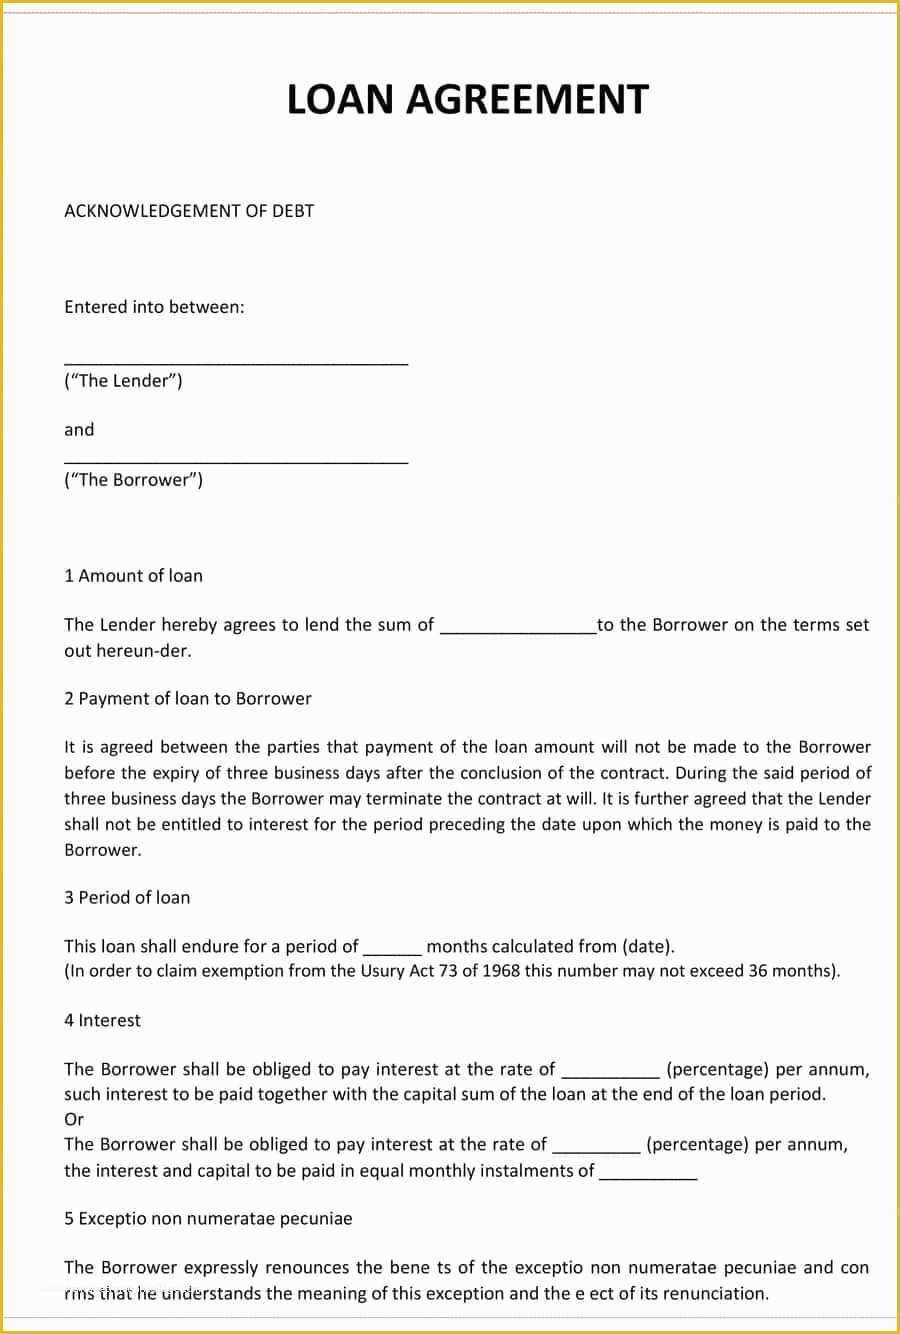 Free Template for Loan Agreement Between Friends Of Personal Loan Contract Between Friends Pdf Download Loan